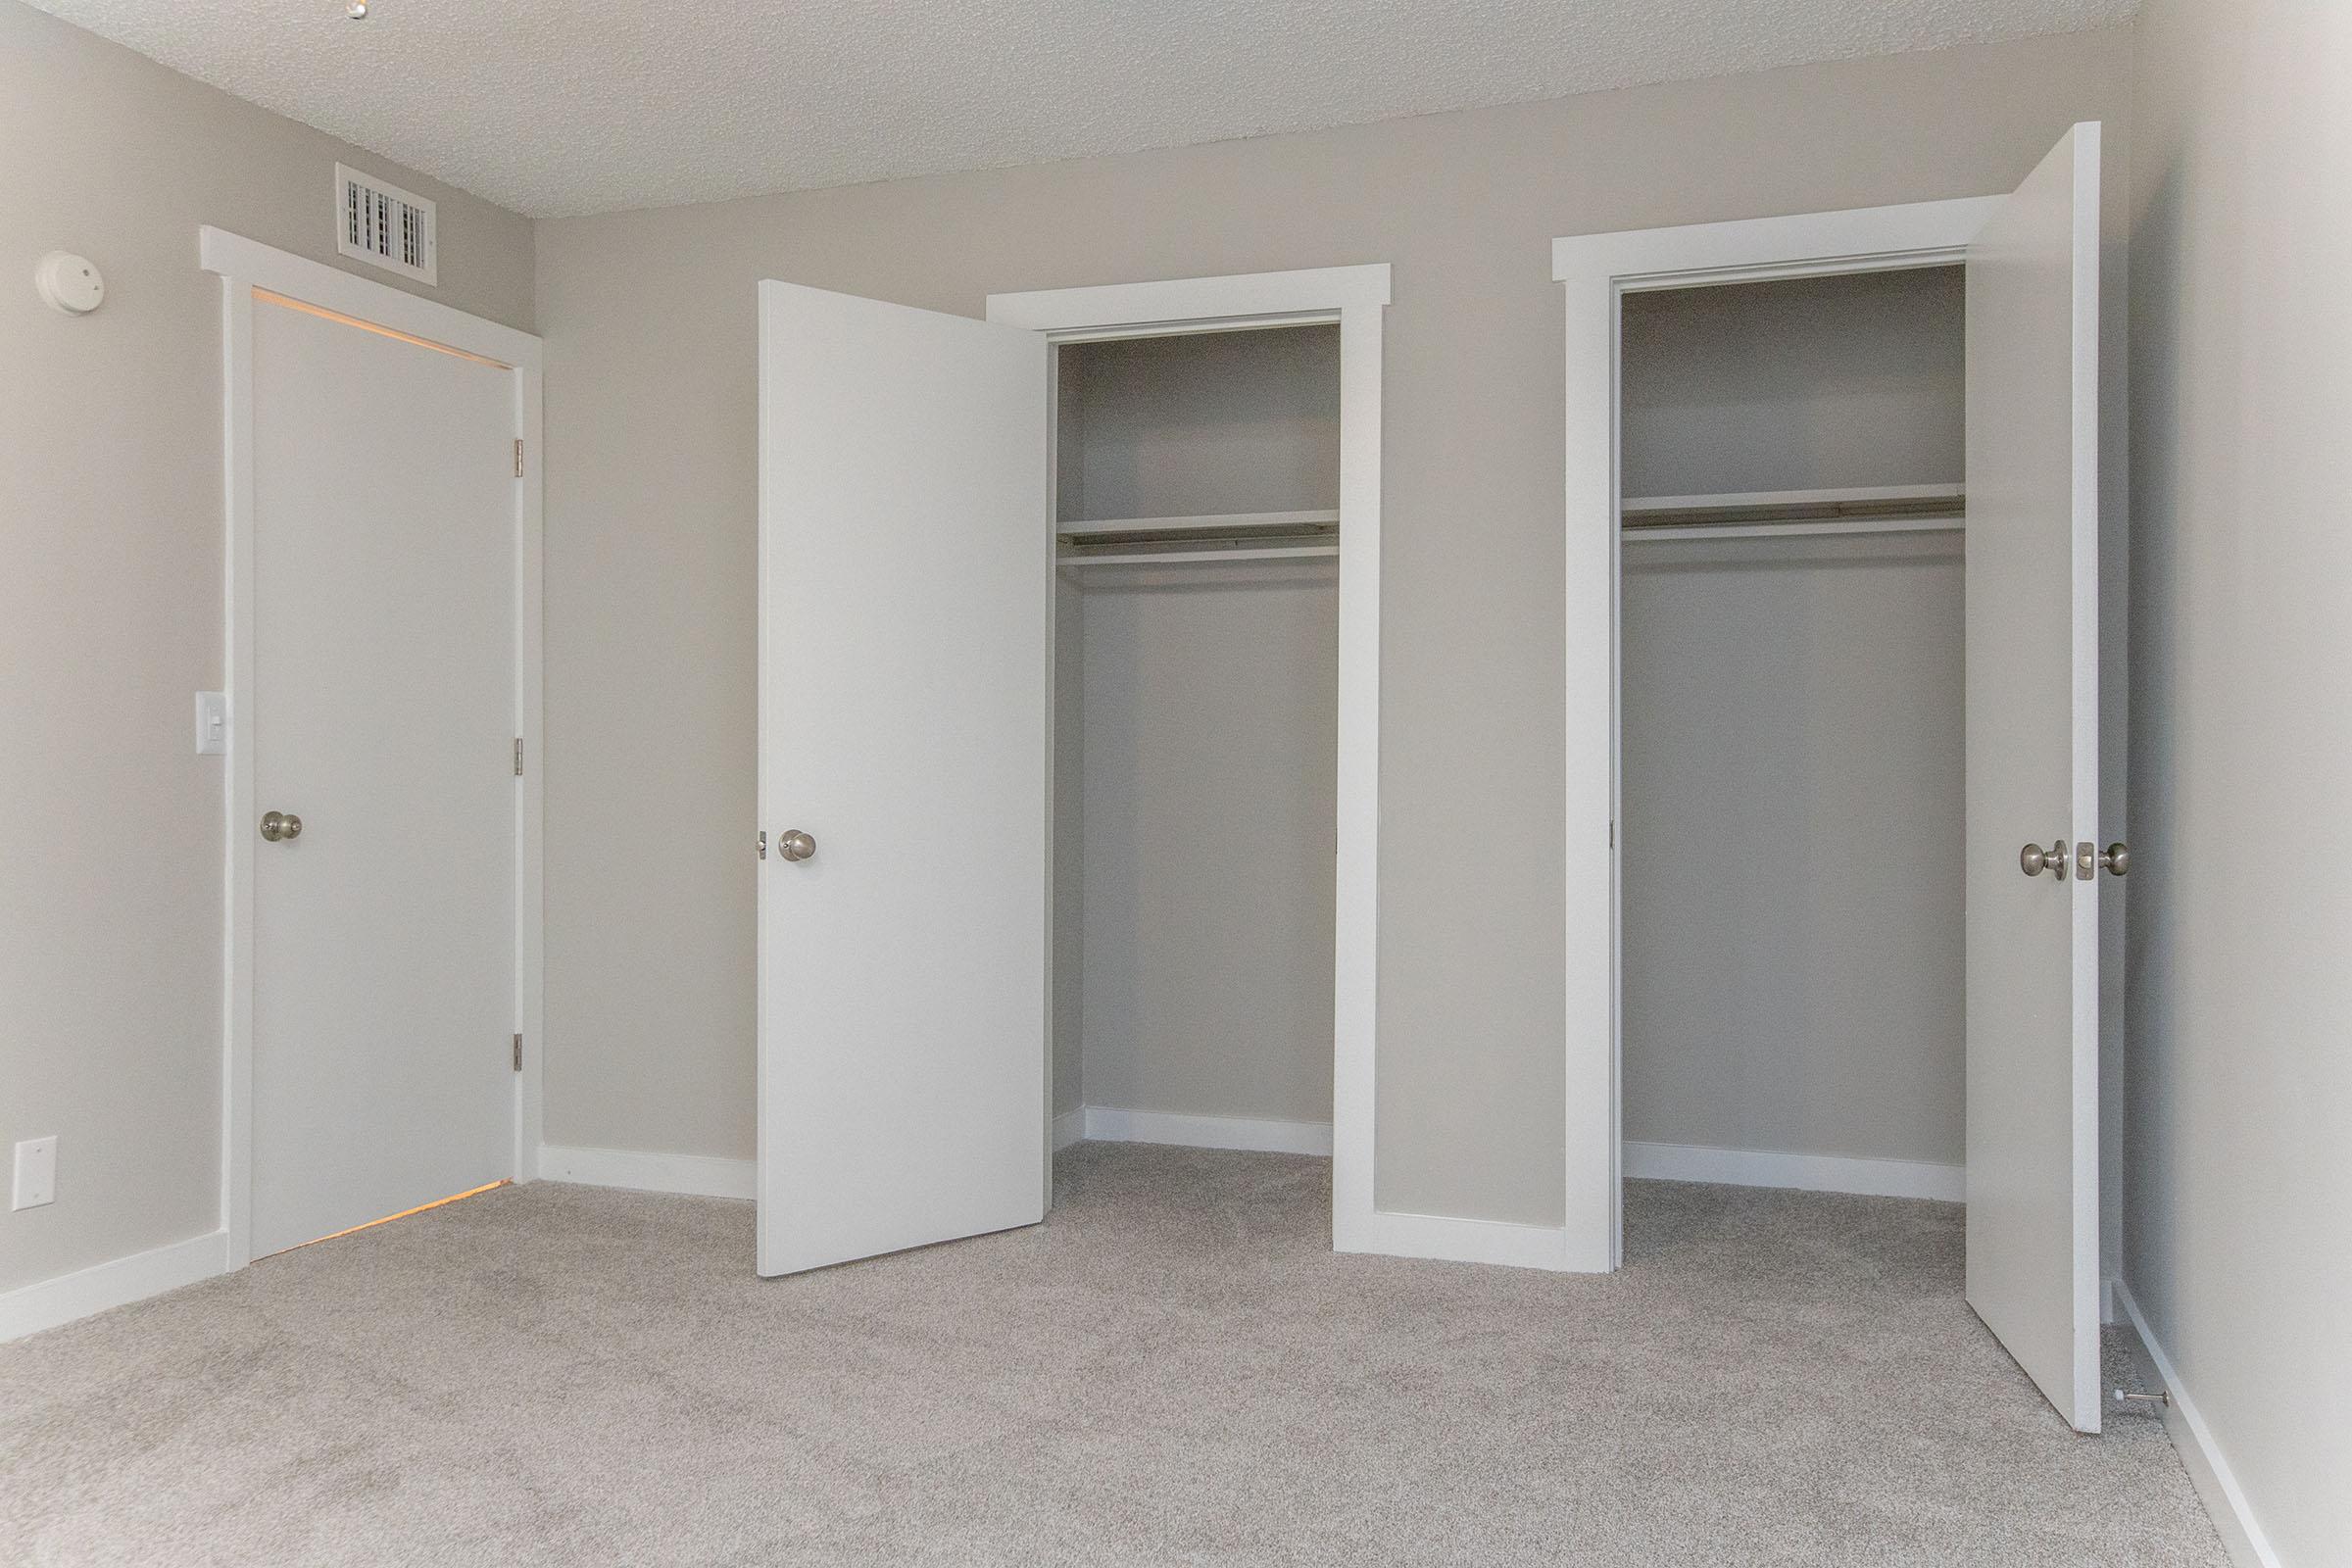 WALK-IN CLOSET AT THE VILLAGES AT PEACHERS MILL